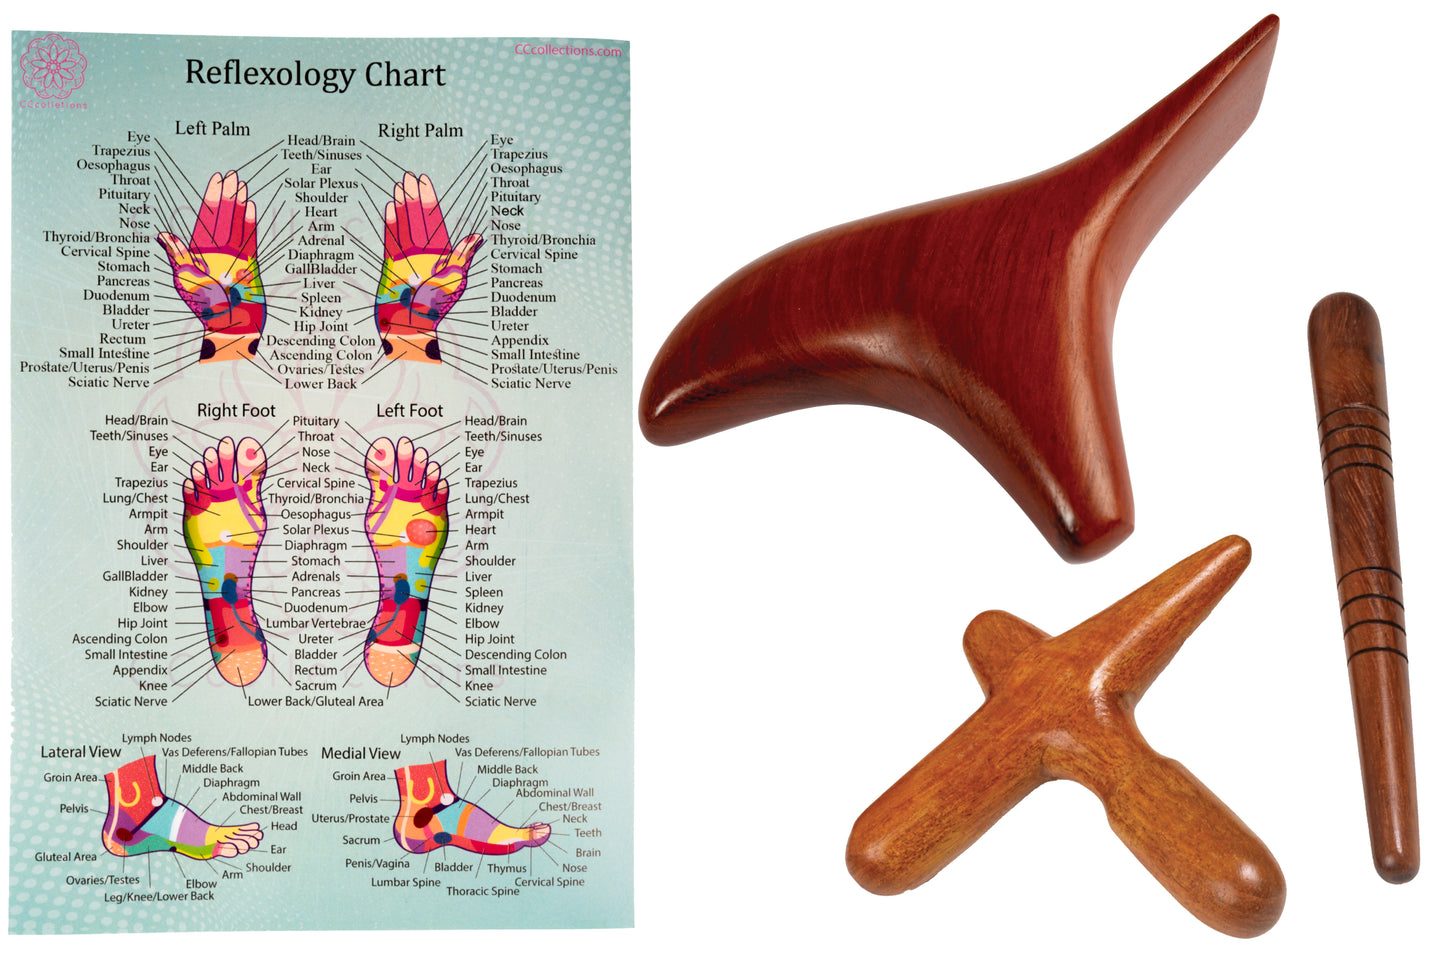 Versatile Wooden Manual Massage Tool Sets for professionals with ENGLISH Reflexology Charts - CCcollections